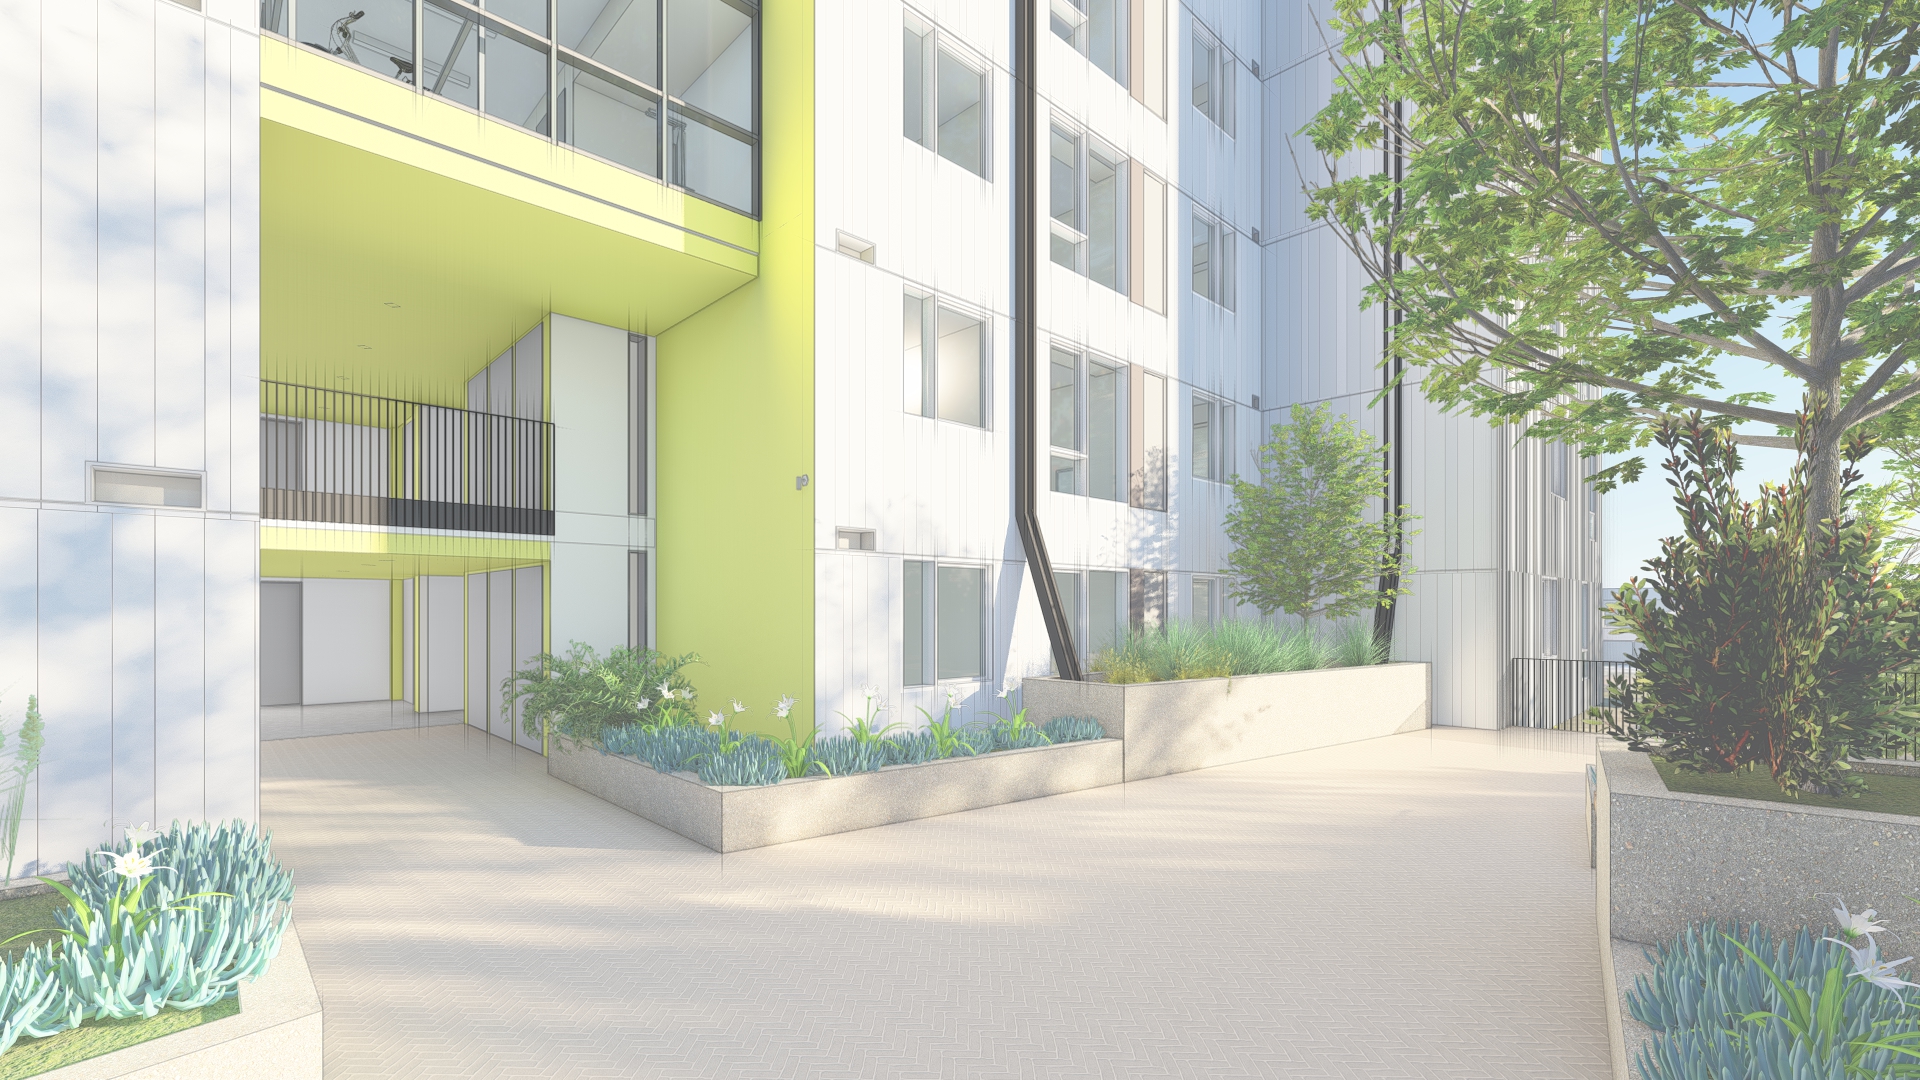 Rendered courtyard in Coliseum Place, affordable housing in Oakland, Ca.